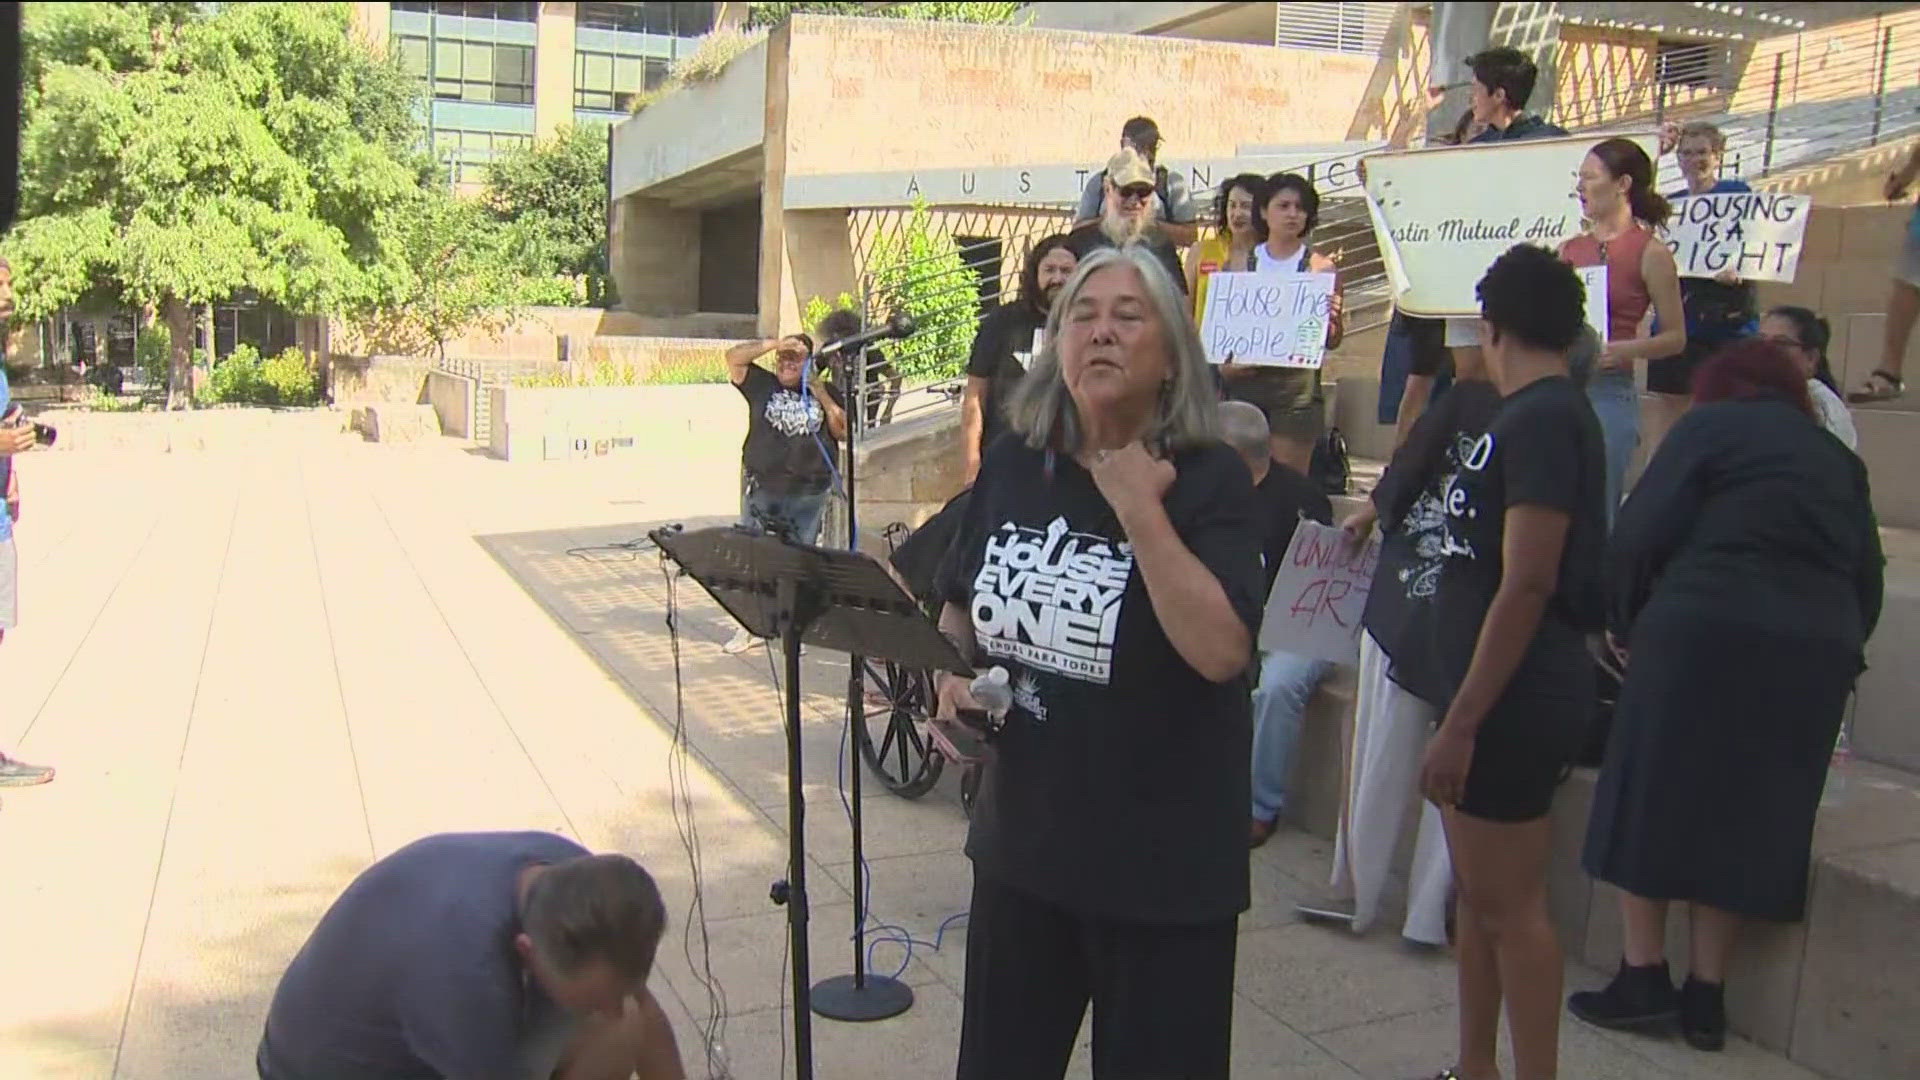 In Austin, a local group that helps the homeless spoke out against a recent decision by the U.S. Supreme Court that allows cities to keep homeless camping bans.